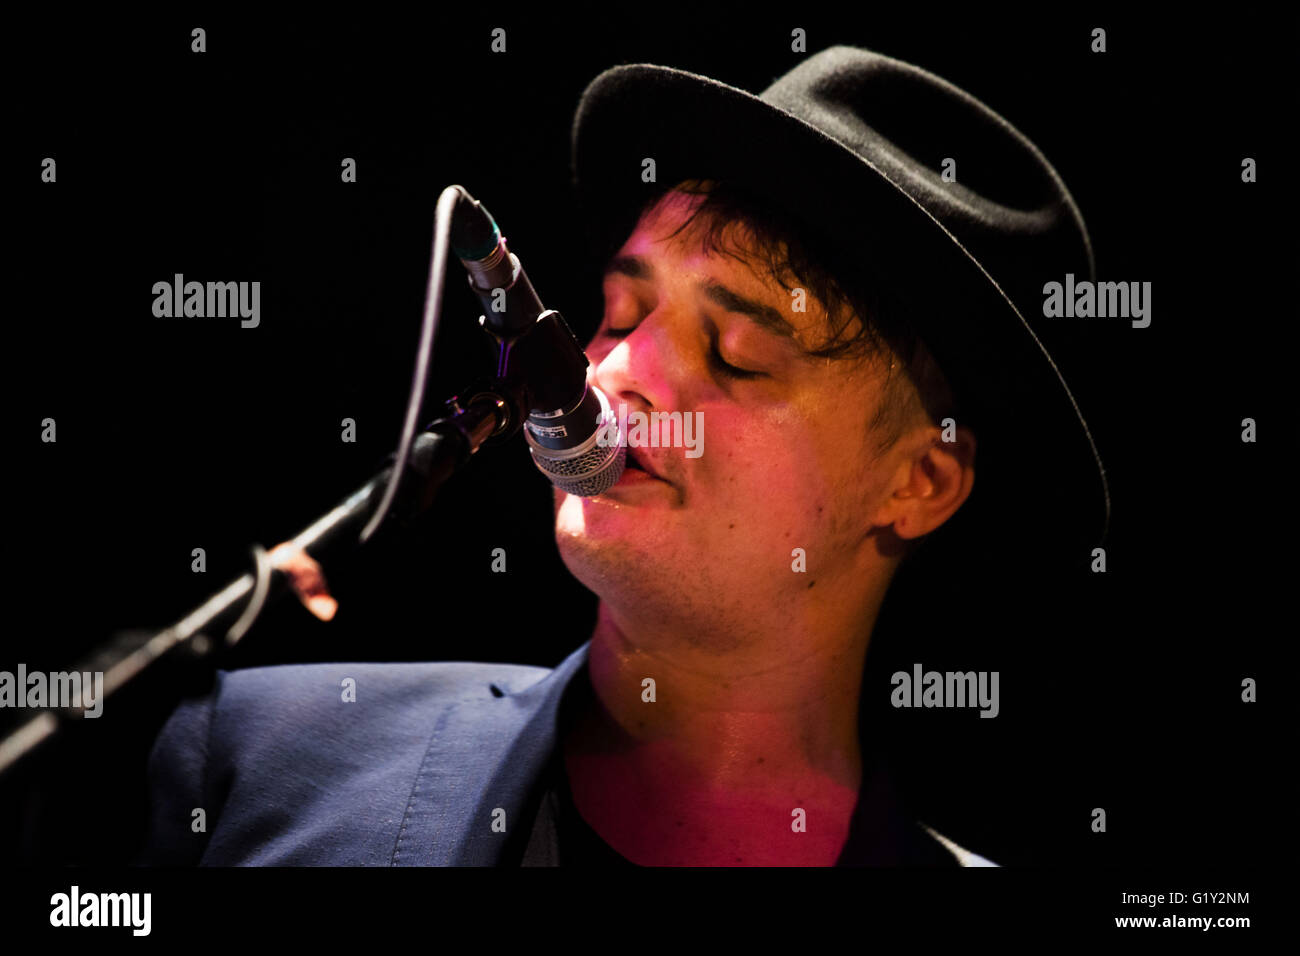 London, UK. 20th May, 2016. Peter Doherty plays live at the Hackney Empire in London, United Kingdom 20th May 2016. Kristian Buus/Alamy Live News Stock Photo